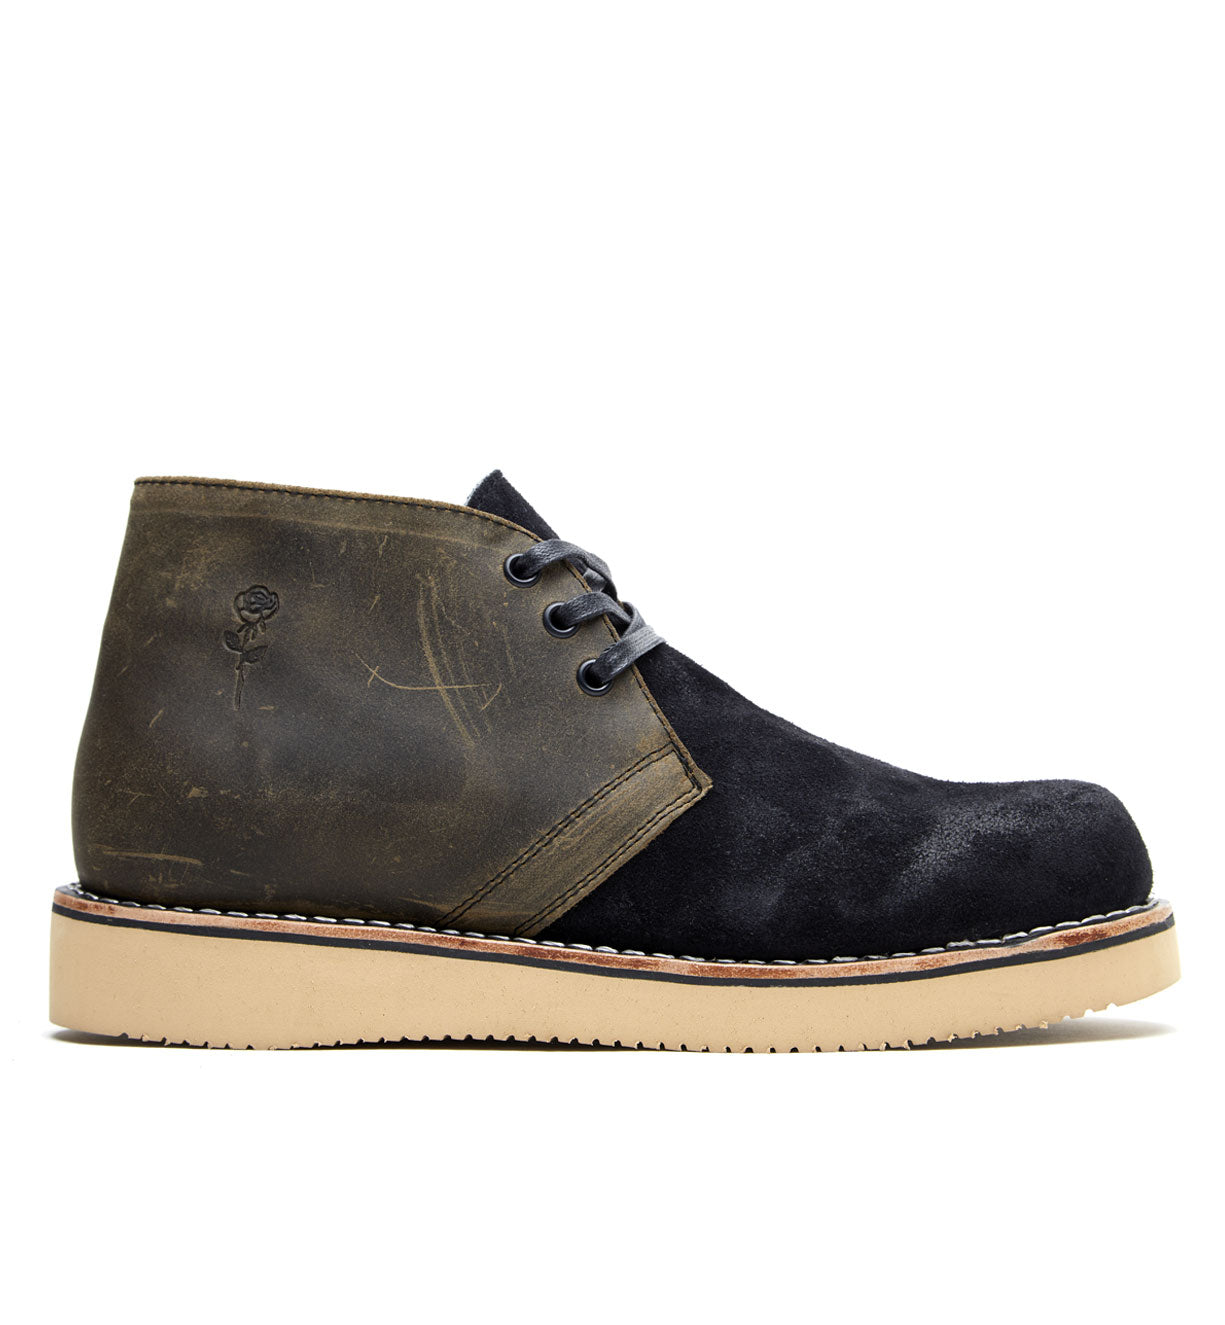 The Union Boot men's navy suede chukka boot from the Santa Rosa Brand collection.